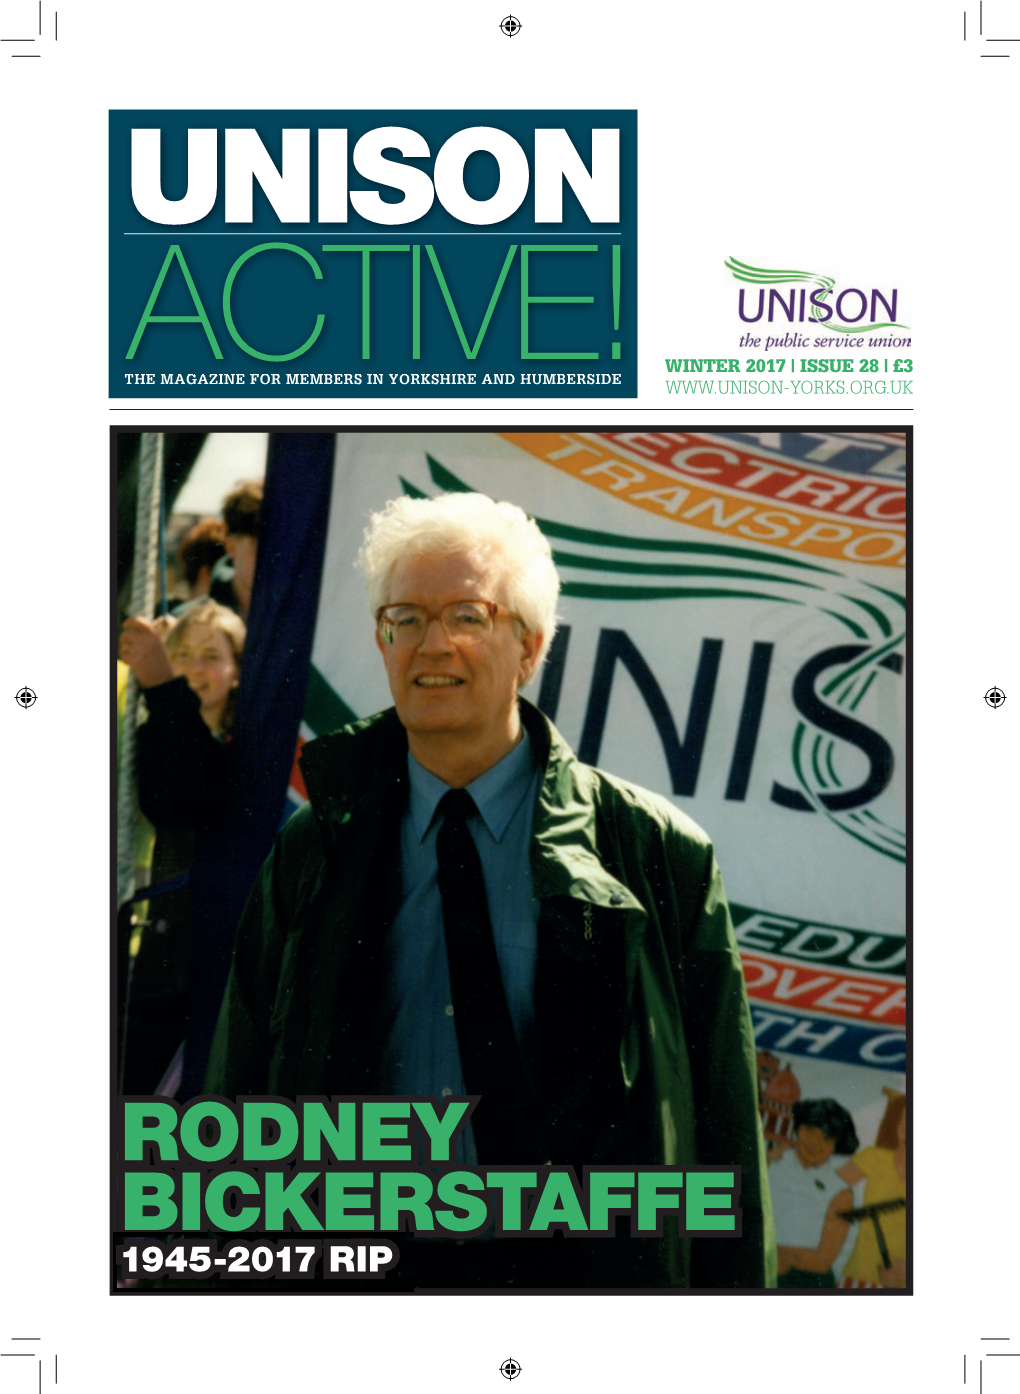 RODNEY BICKERSTAFFE 1945-2017 RIP ESSENTIAL COVER WHEREVER YOUADVERTISING WORK SPACE in These Uncertain Times There’S Never Been a Better Time to Join UNISON